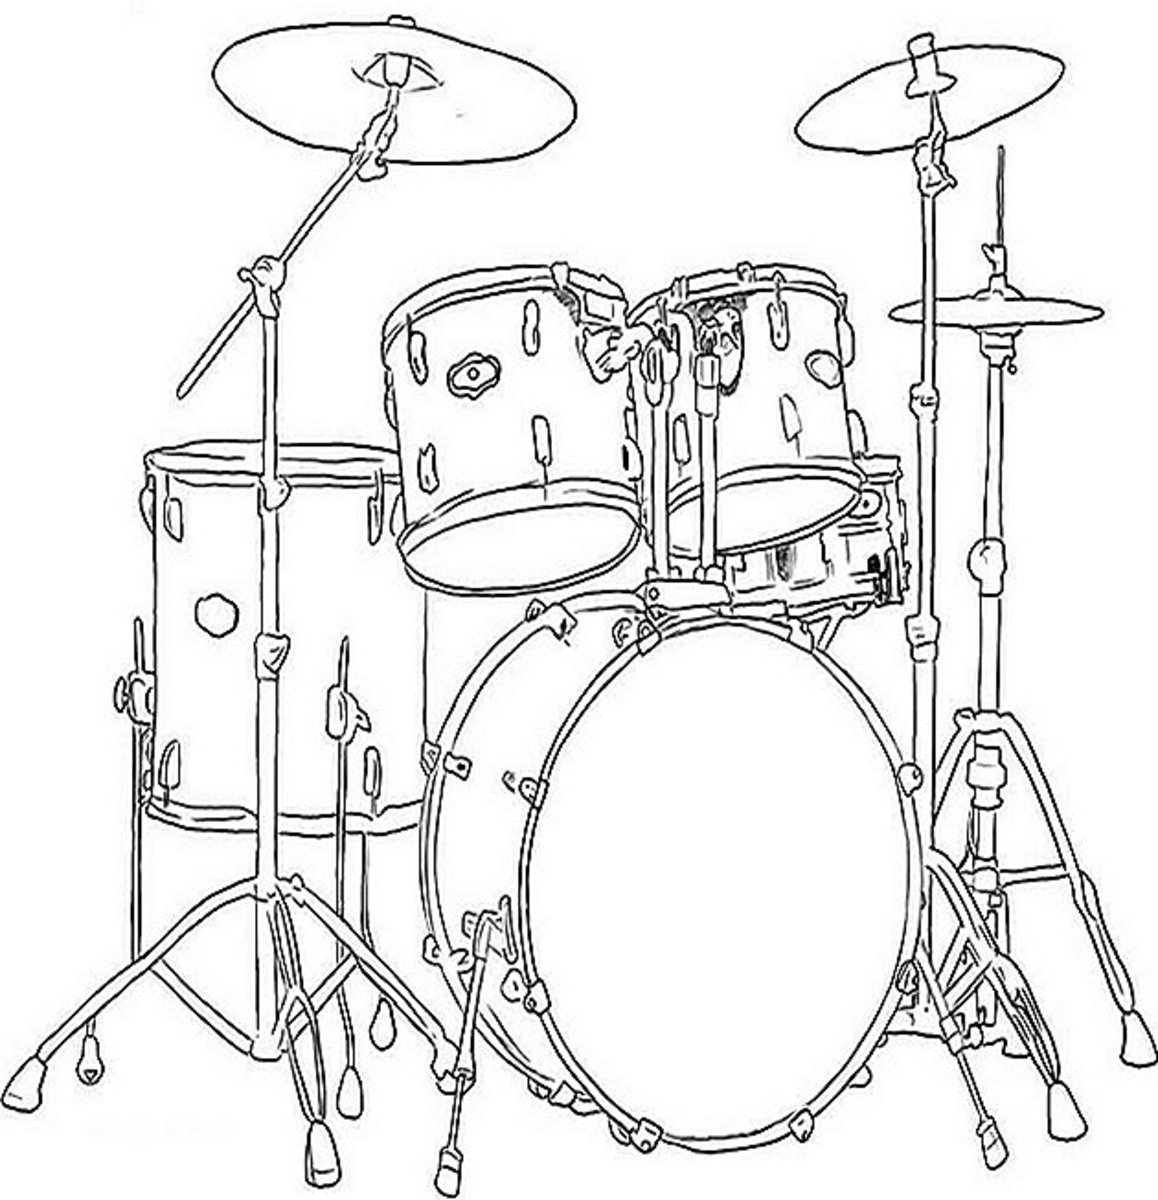 Download Musical Instruments Kids Coloring Pages Free Colouring Pictures to Print